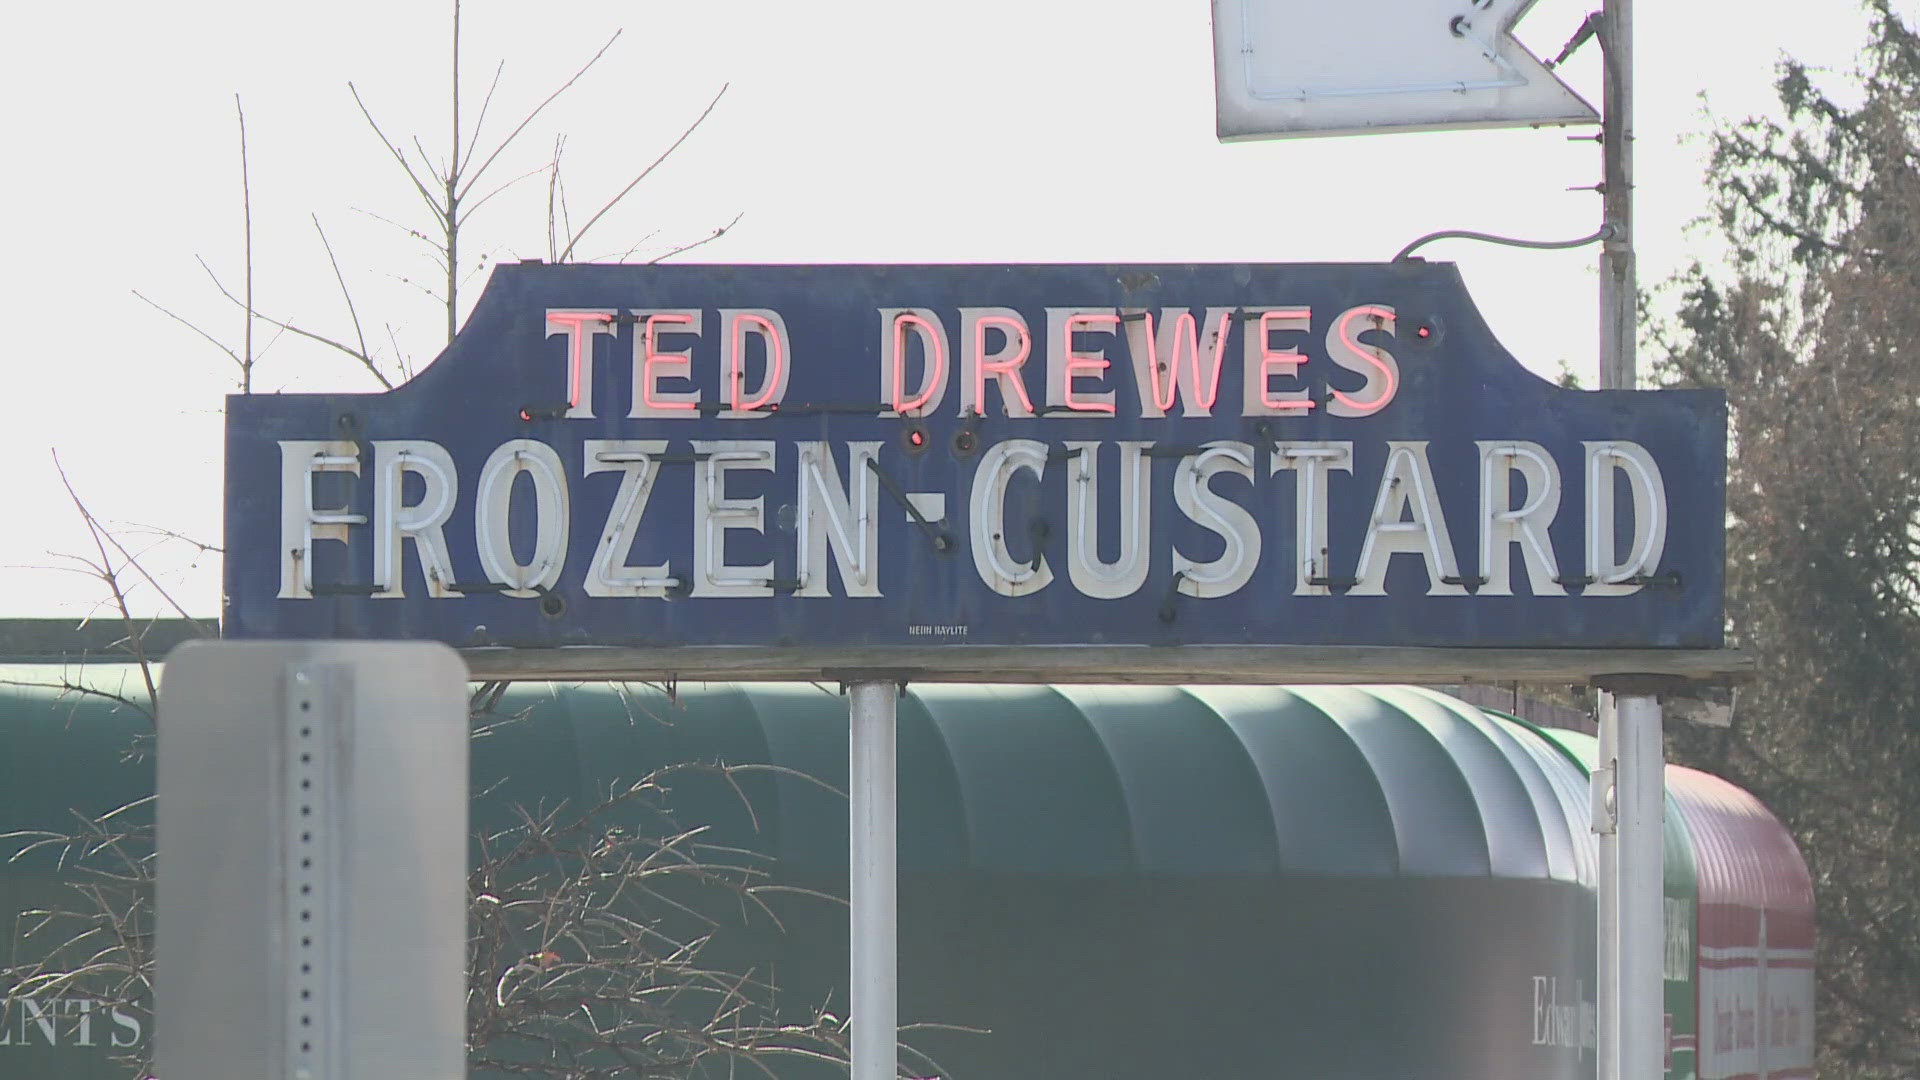 Ted Drewes is celebrating its 95th anniversary on Thursday. It will offer 95-cent cones, family activities, a visit from Fredbird and more.